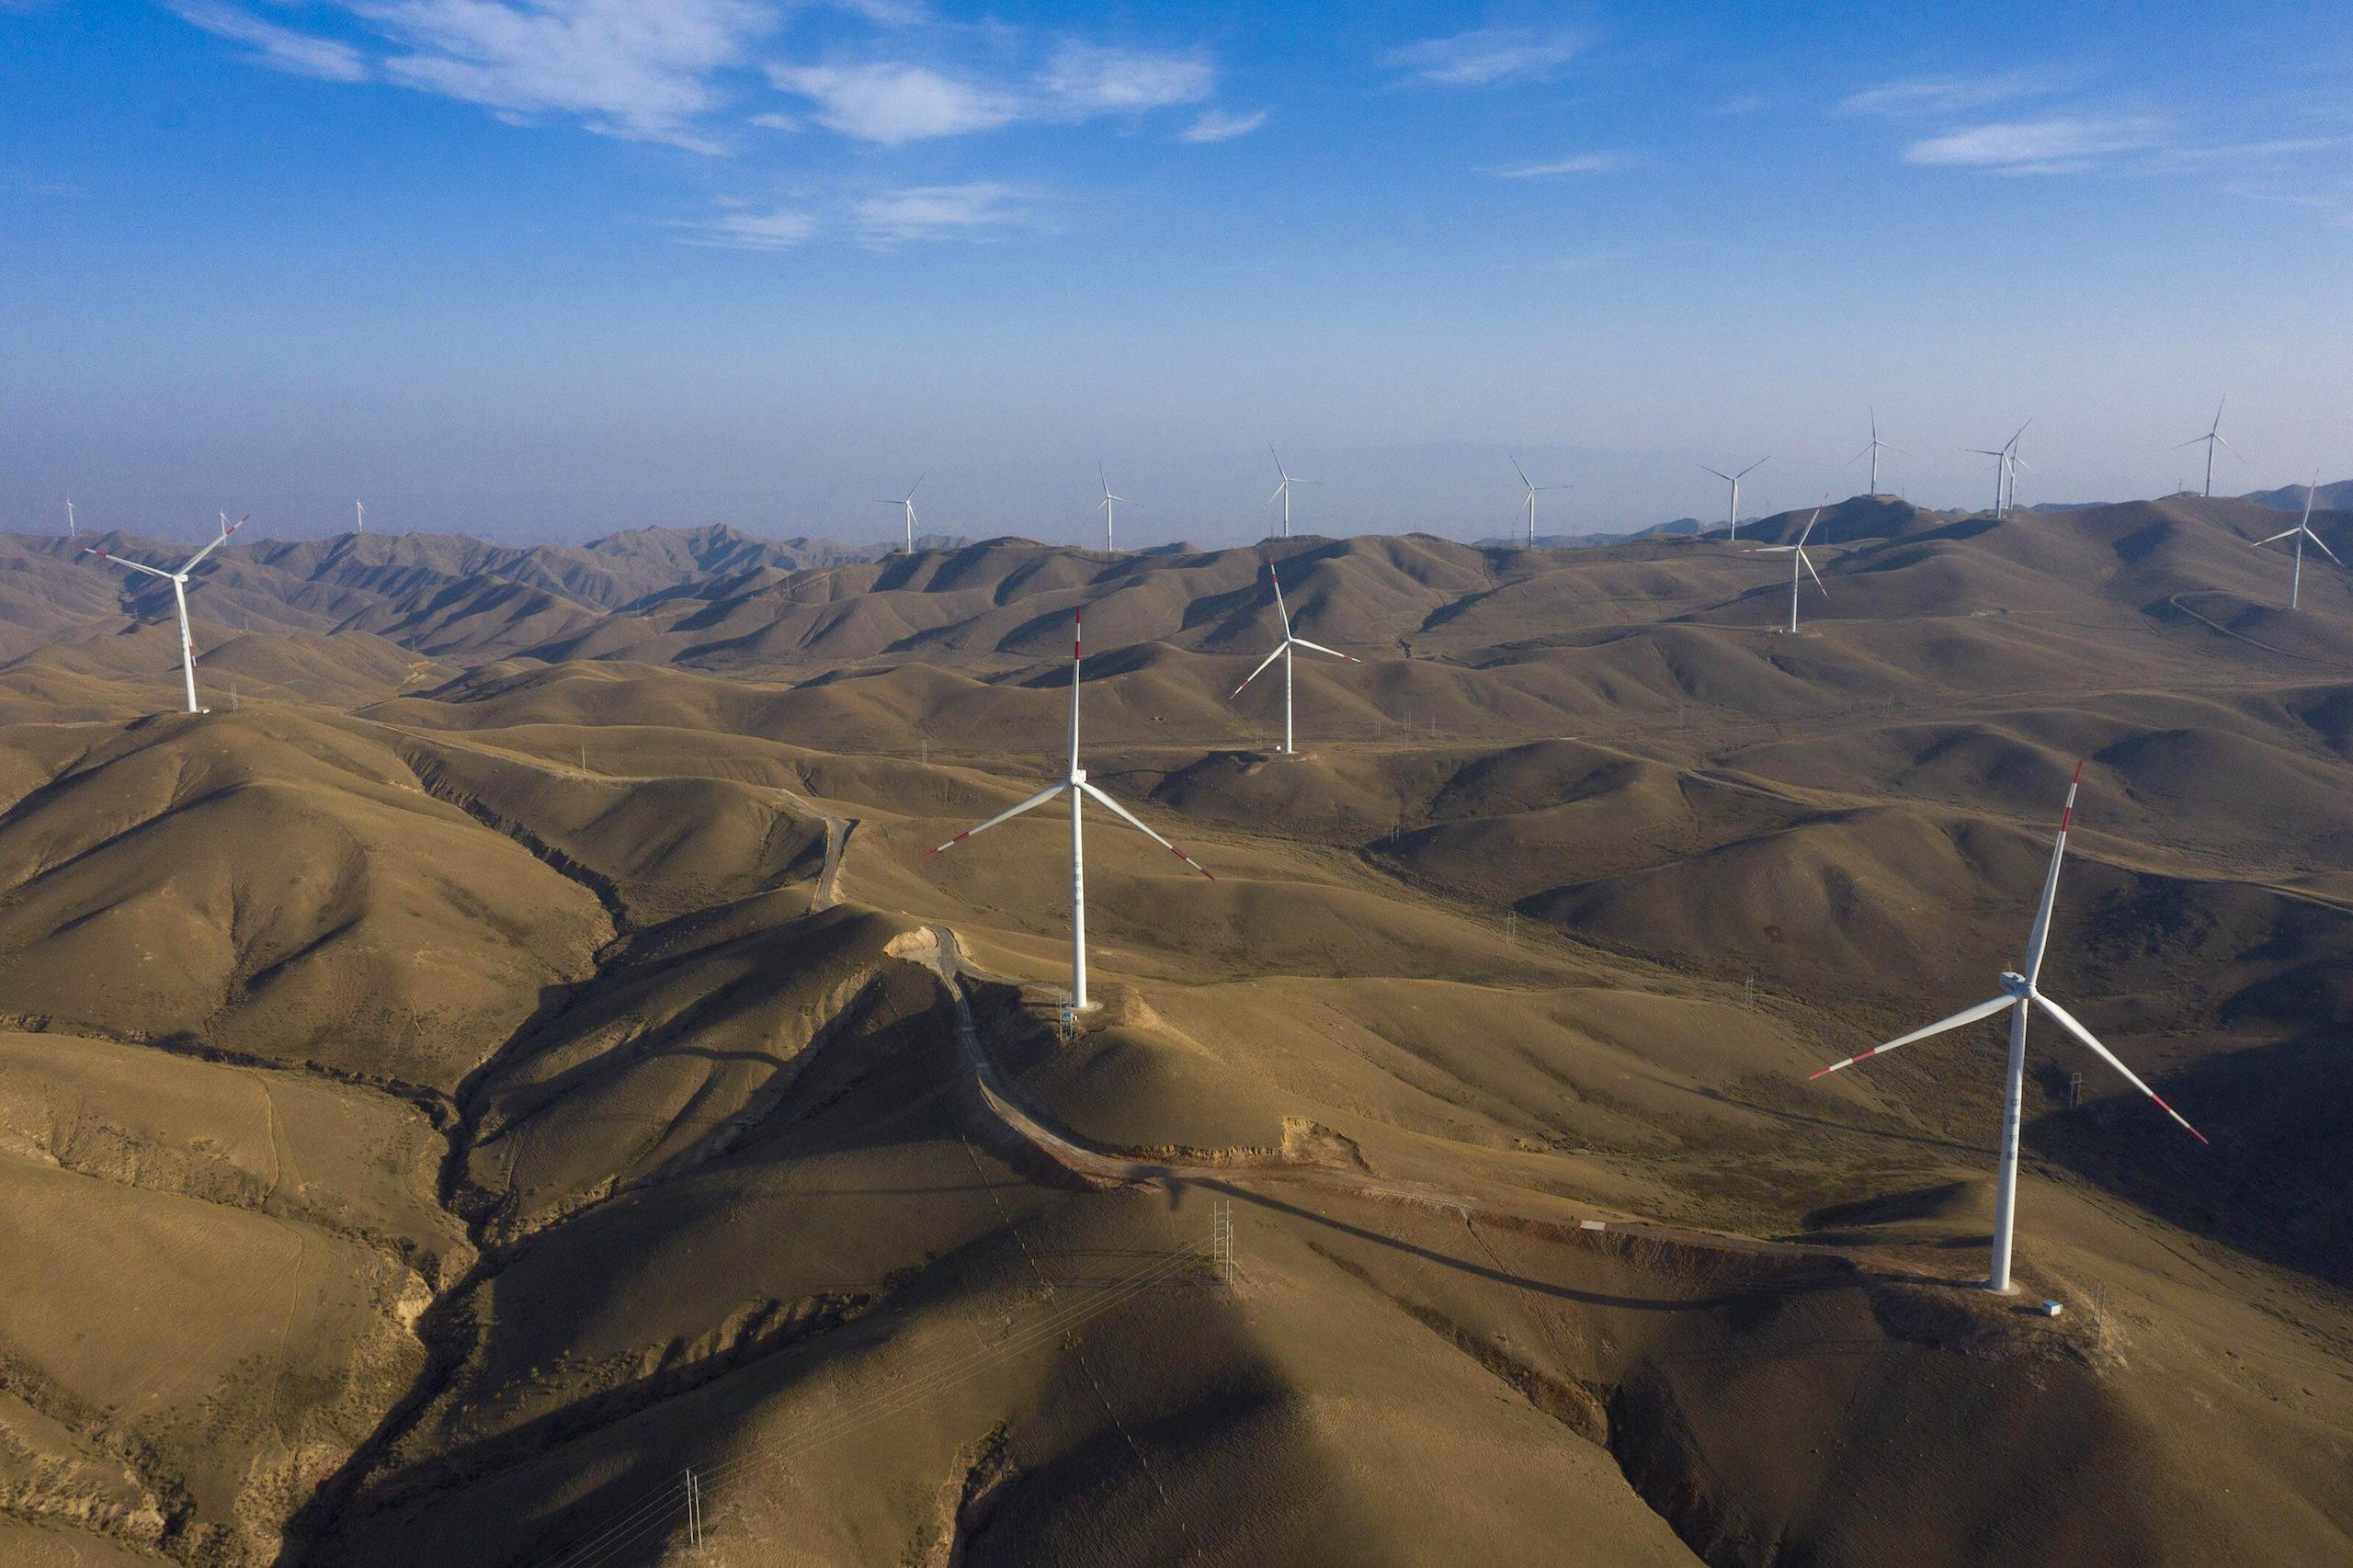 <p>Wind turbines in Gansu province. The NGO Friends of Nature recently <a href="https://climatecasechart.com/non-us-case/the-friends-of-nature-institute-v-gansu-state-grid/">won</a> a case against Gansu State Grid, forcing the state-owned enterprise to invest in and transition to renewable energy (Image: Imaginechina / Alamy)</p>